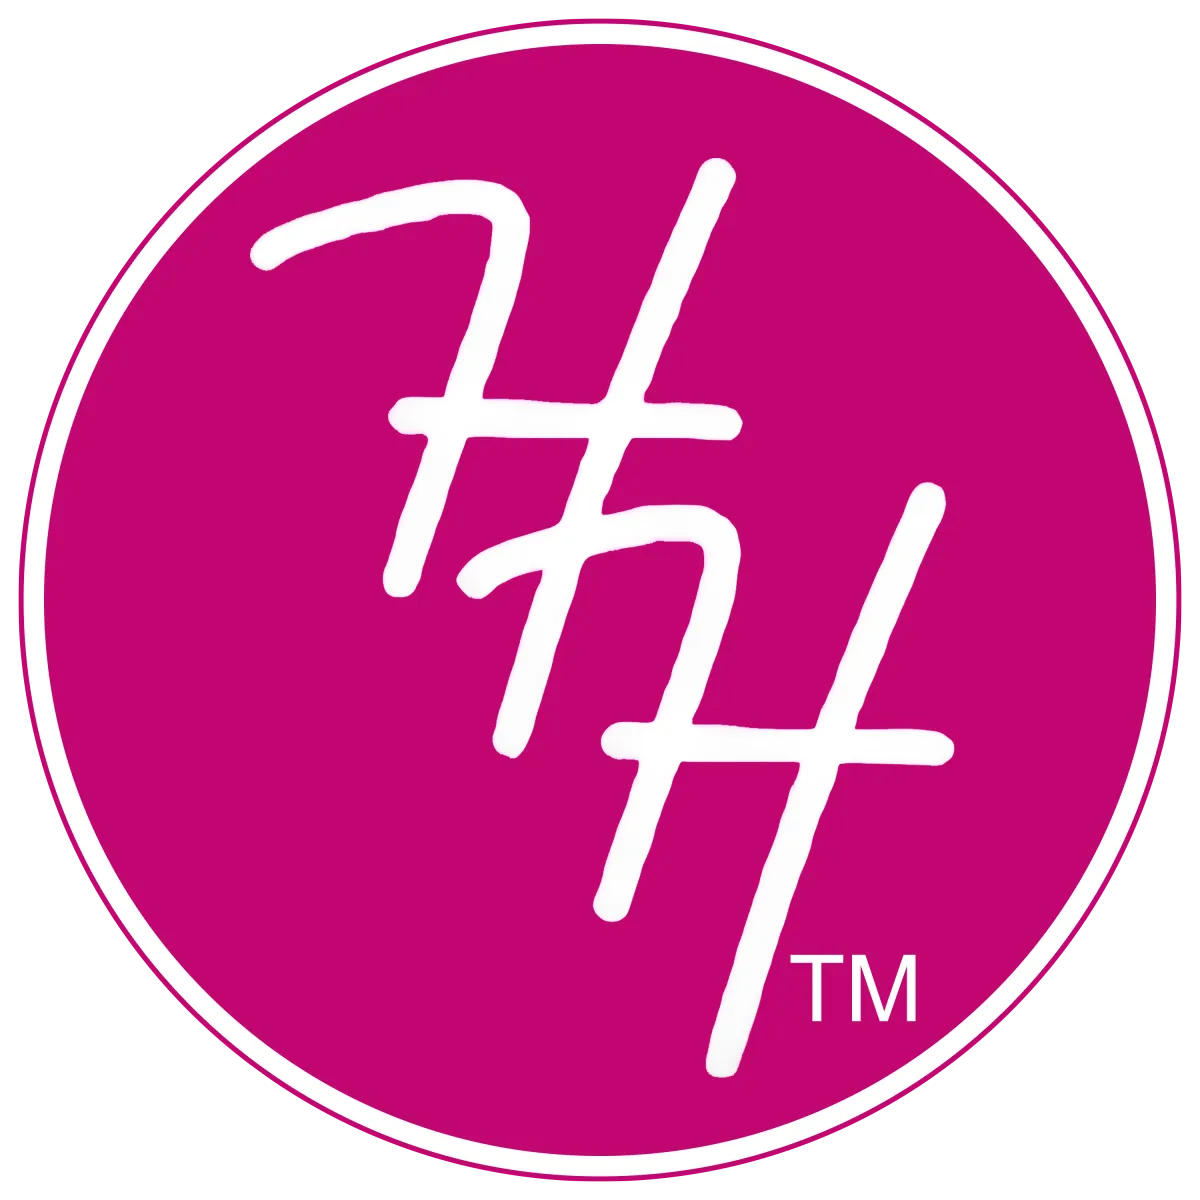 Heather Havenwood female business and marketing consultant